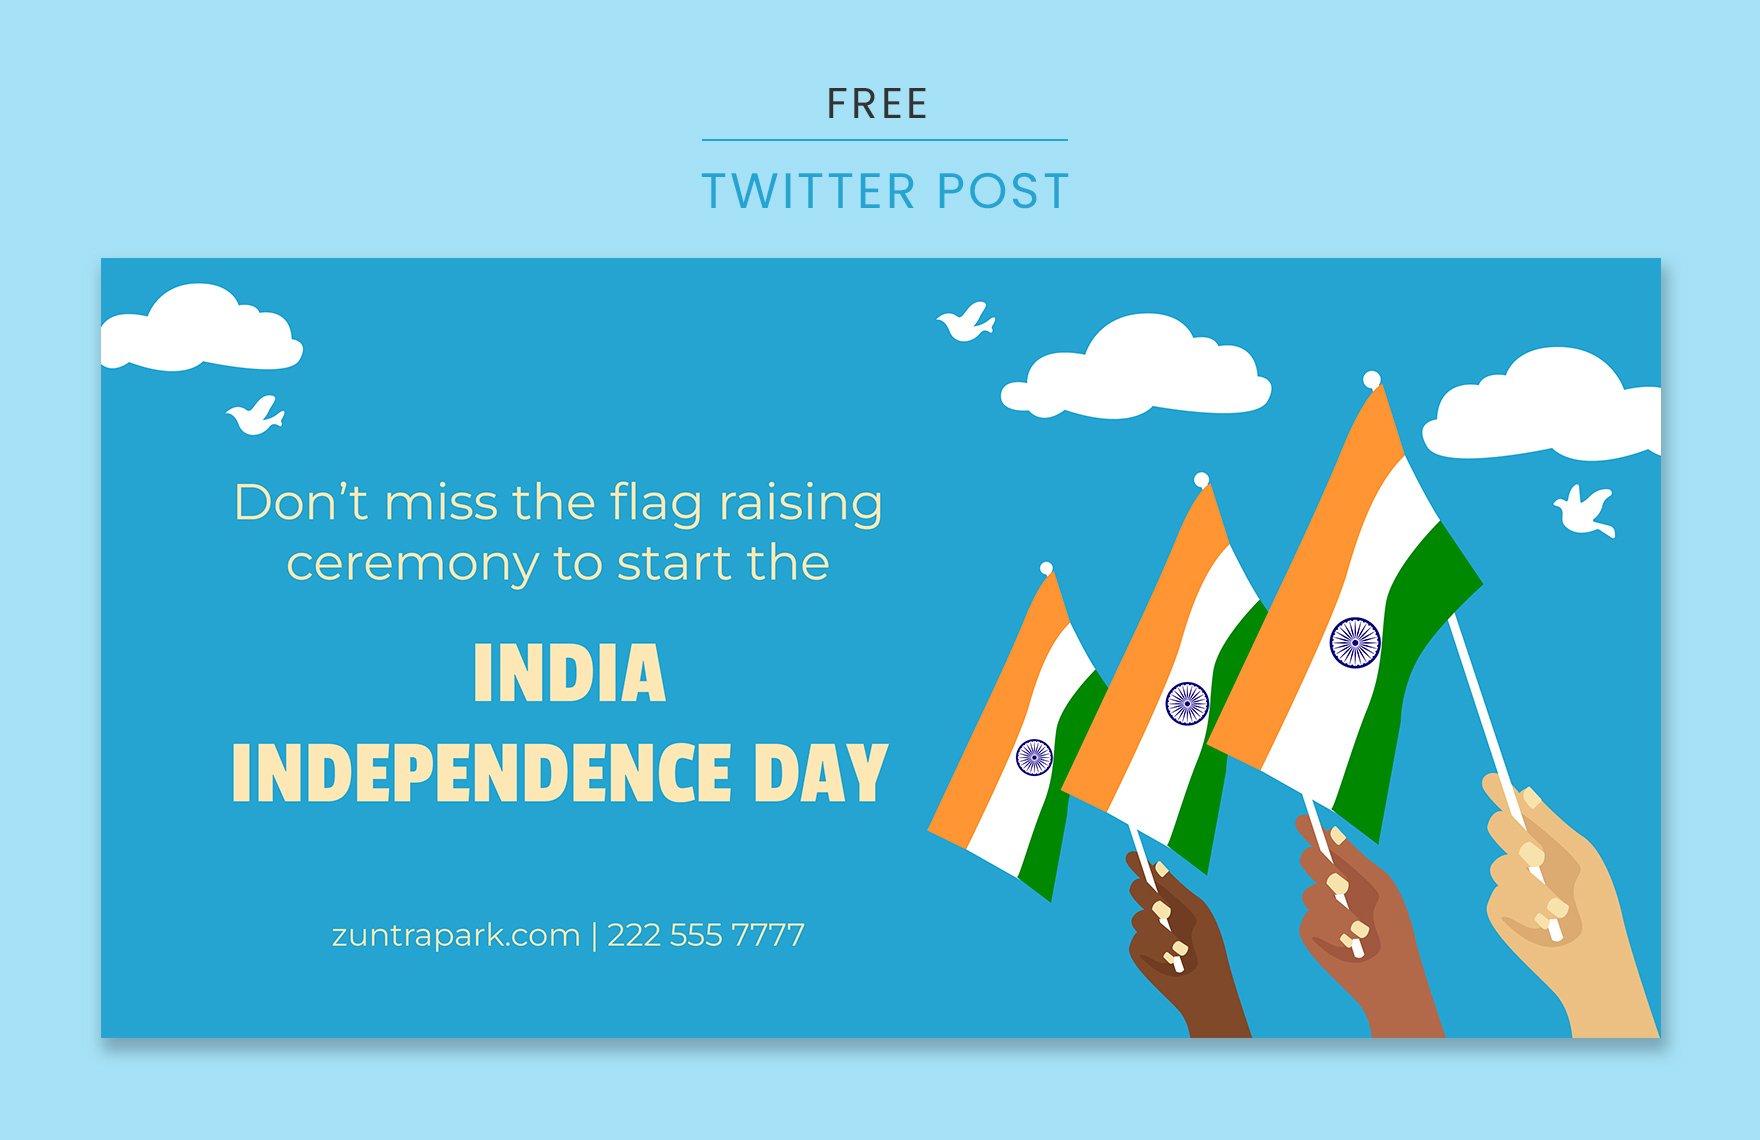 India Independence Day Twitter Post Template in PDF, Illustrator, SVG, JPEG